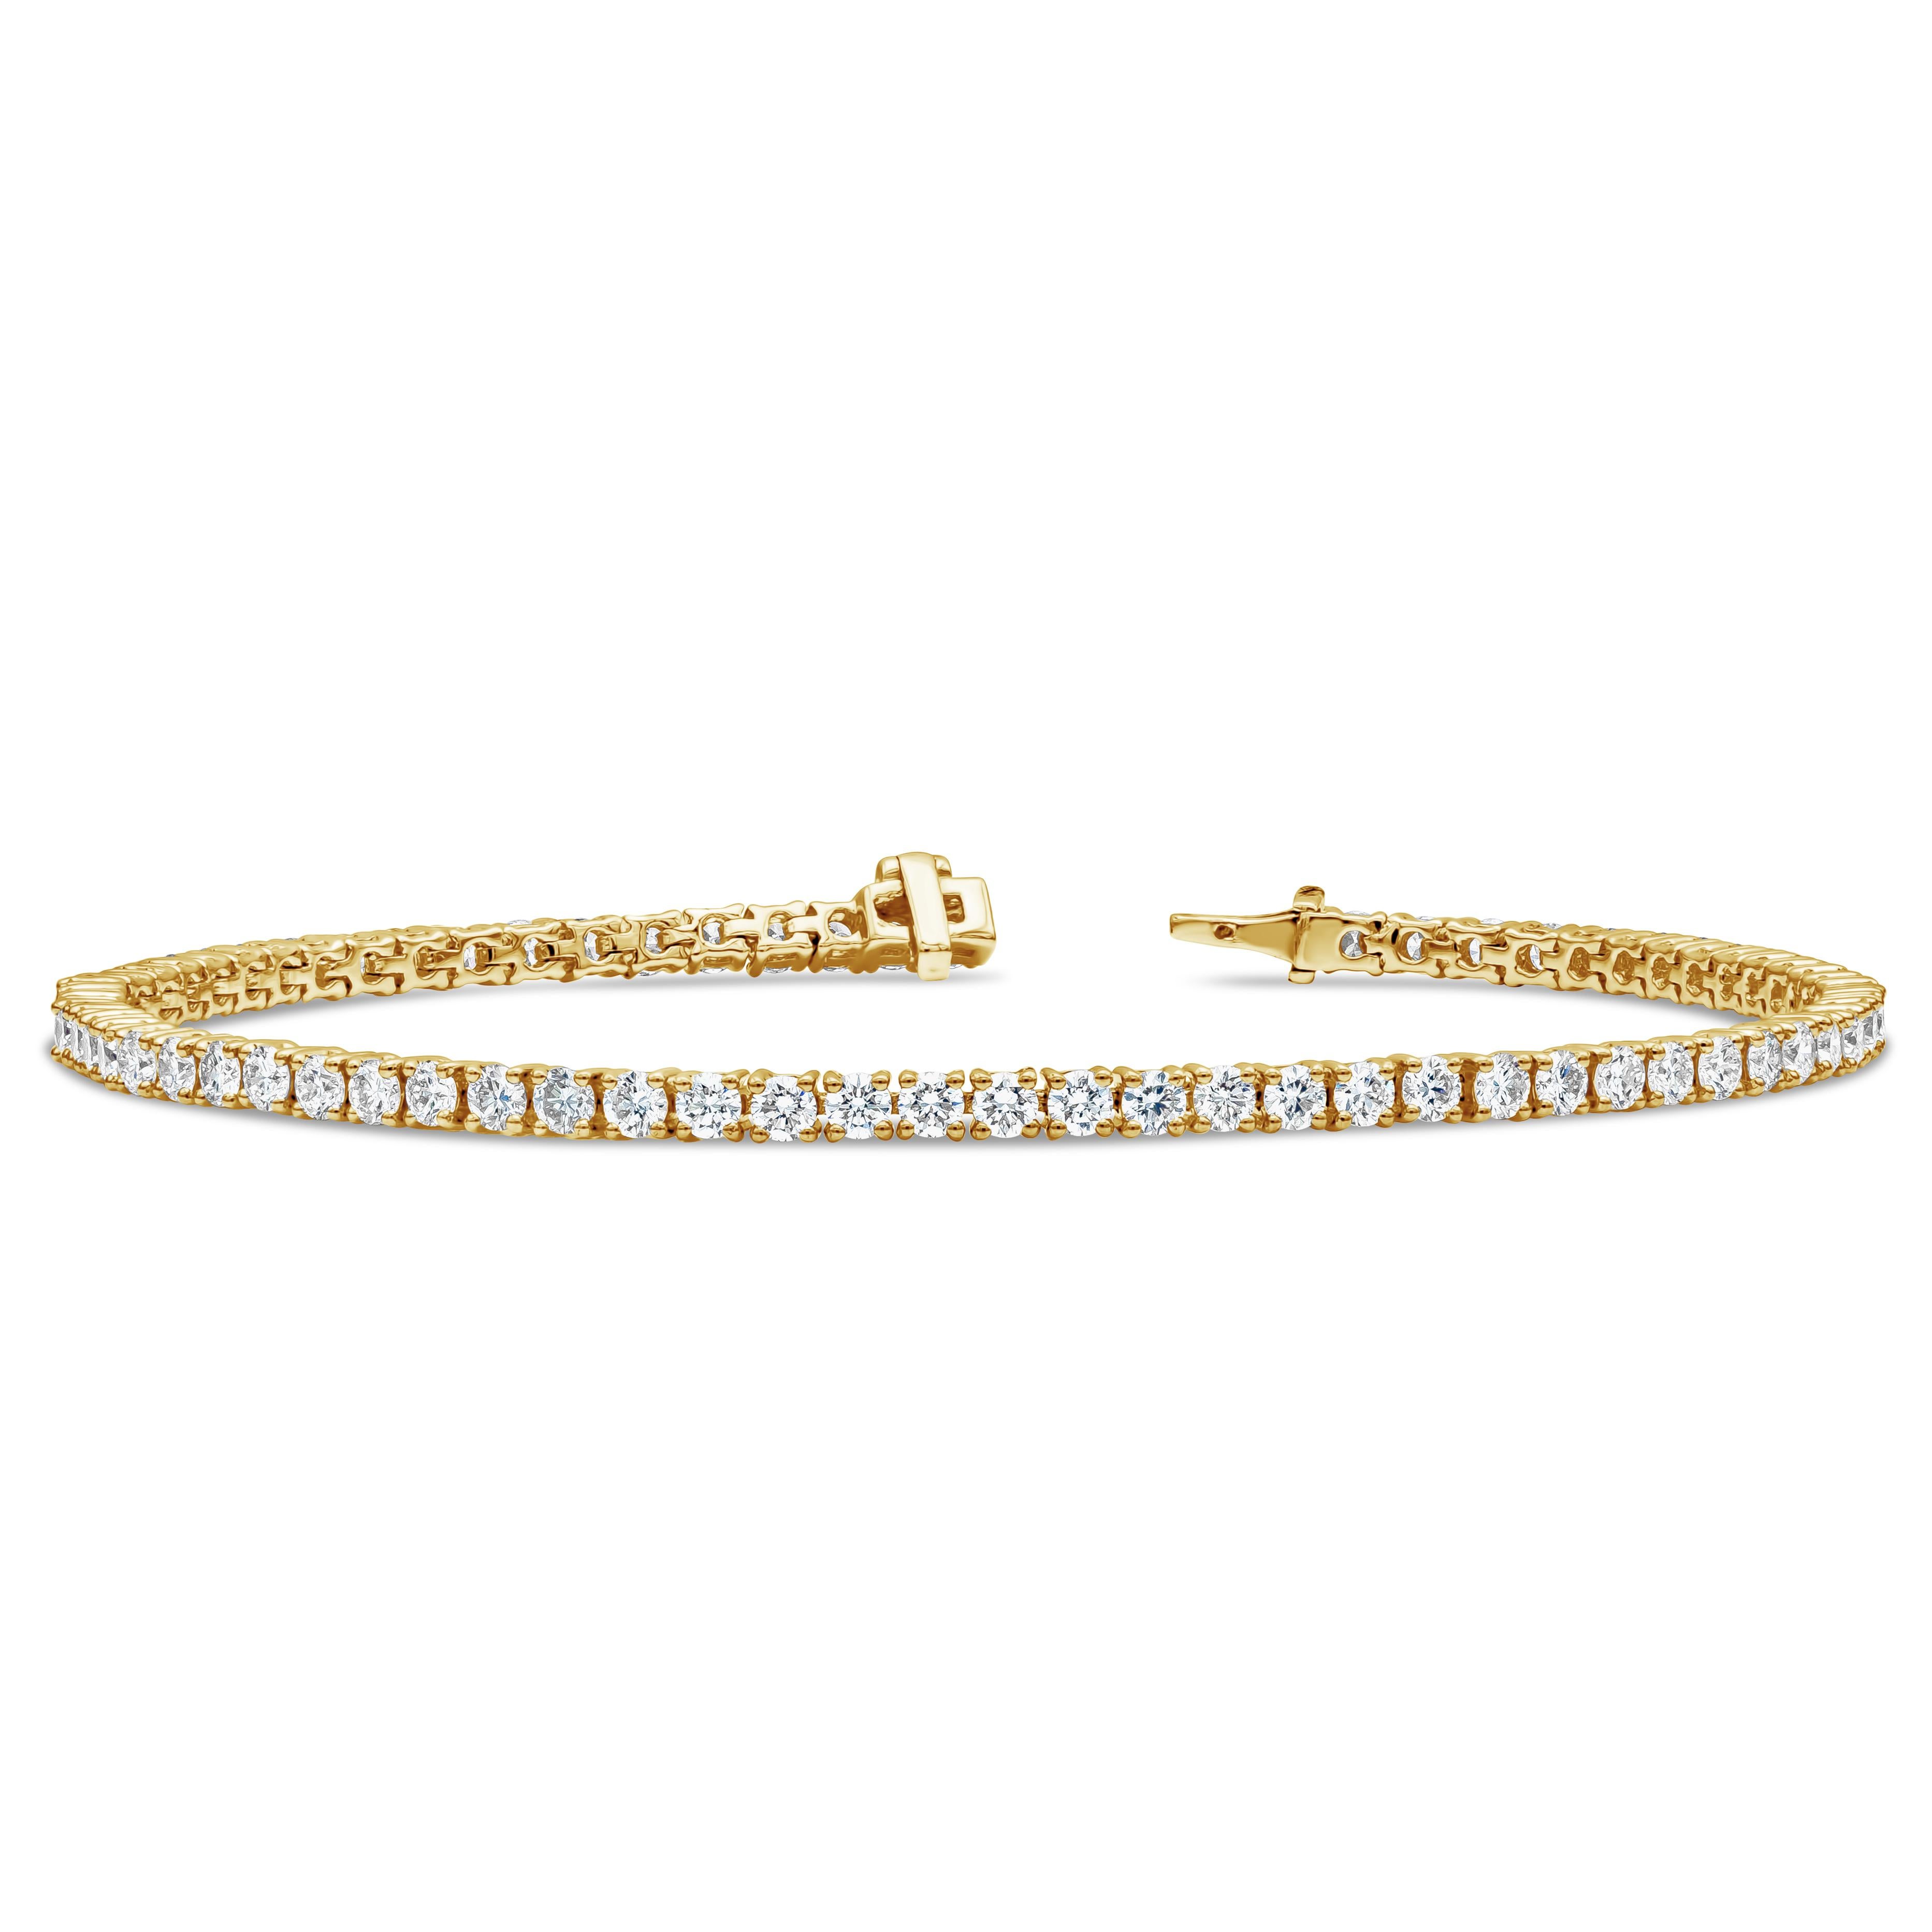 A classic tennis bracelet style showcasing 66 round brilliant diamonds weighing 2.50 carats total, F-G color and SI in clarity. 6.25 inches in Length. 2.15mm in Width. Made in 18K Yellow Gold.

Roman Malakov is a custom house, specializing in